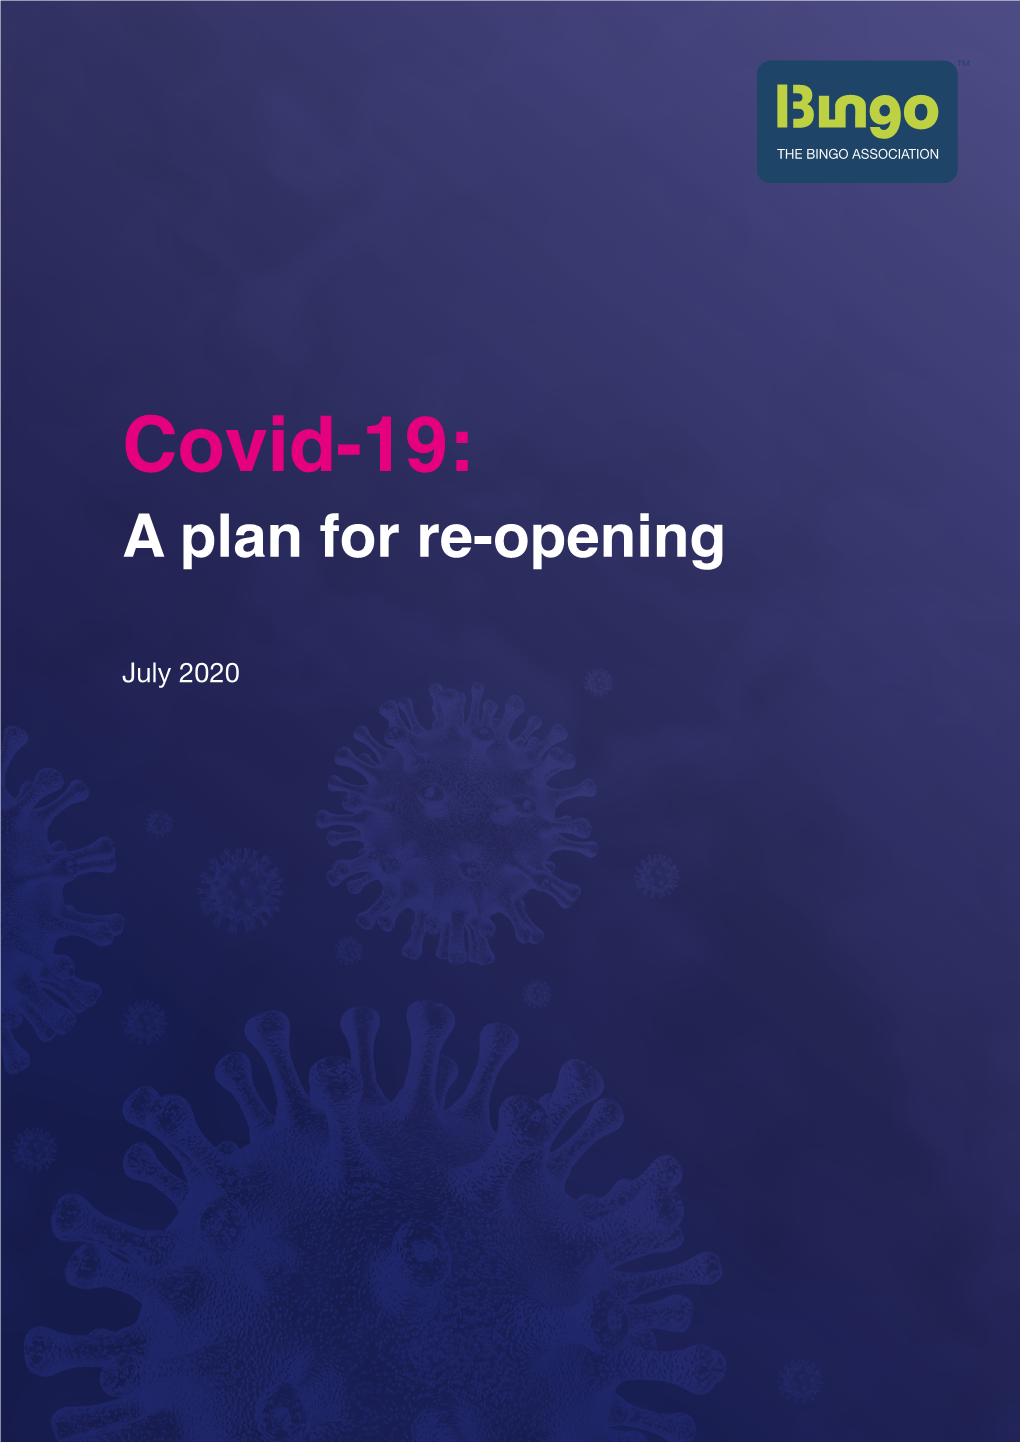 Covid-19: a Plan for Re-Opening